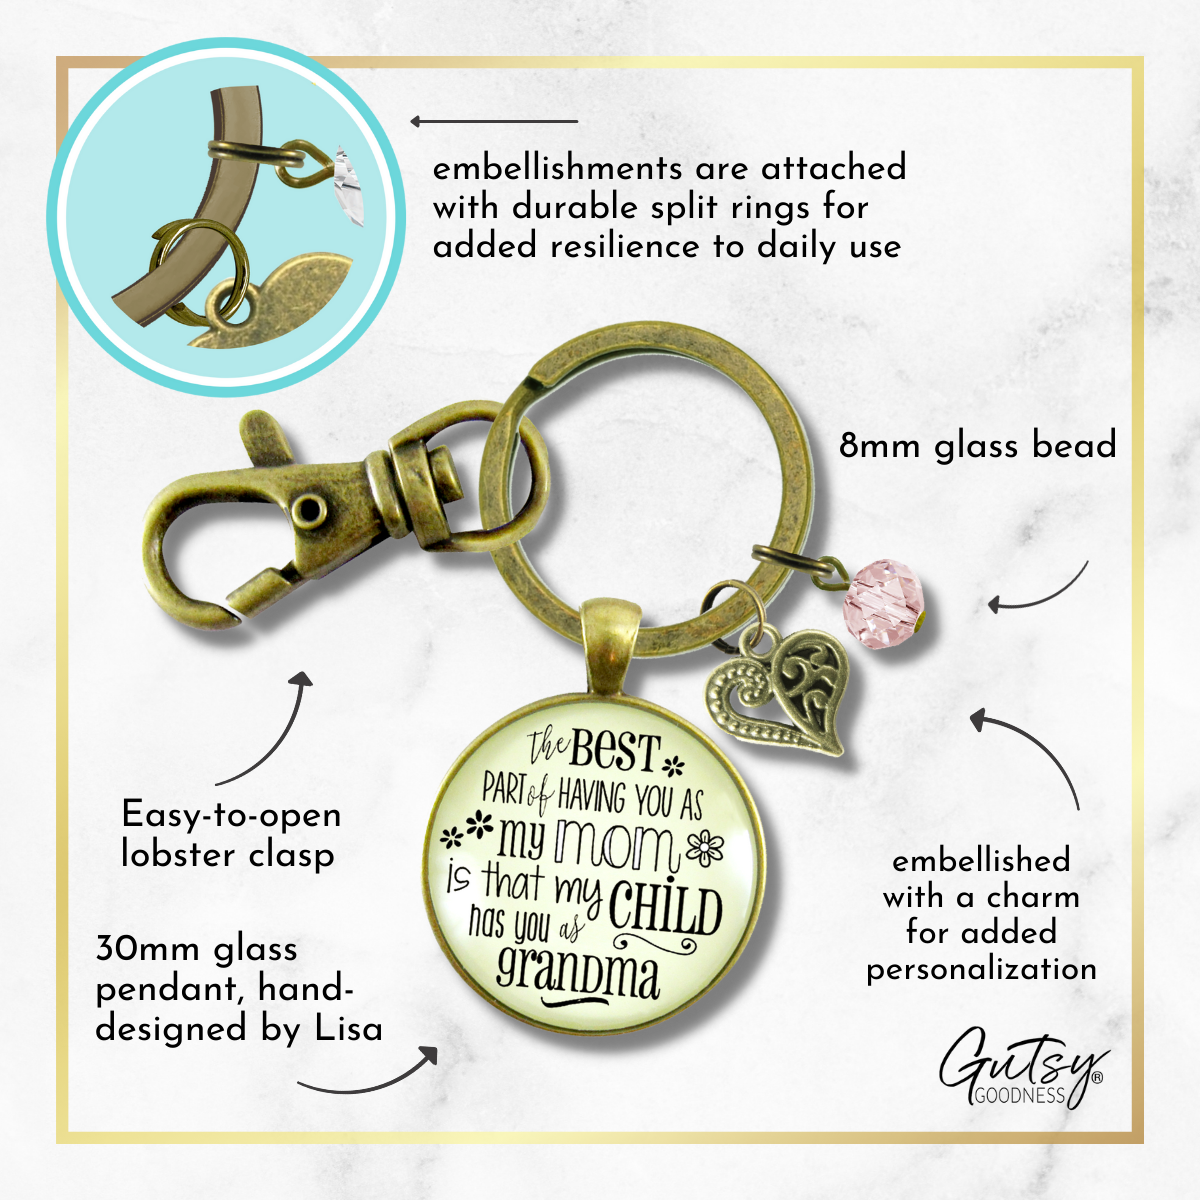 Grandmother Keychain Best Part You As Mom My Child Has Grandma Jewelry Gift From Daughter - Gutsy Goodness Handmade Jewelry;Grandmother Keychain Best Part You As Mom My Child Has Grandma Jewelry Gift From Daughter - Gutsy Goodness Handmade Jewelry Gifts